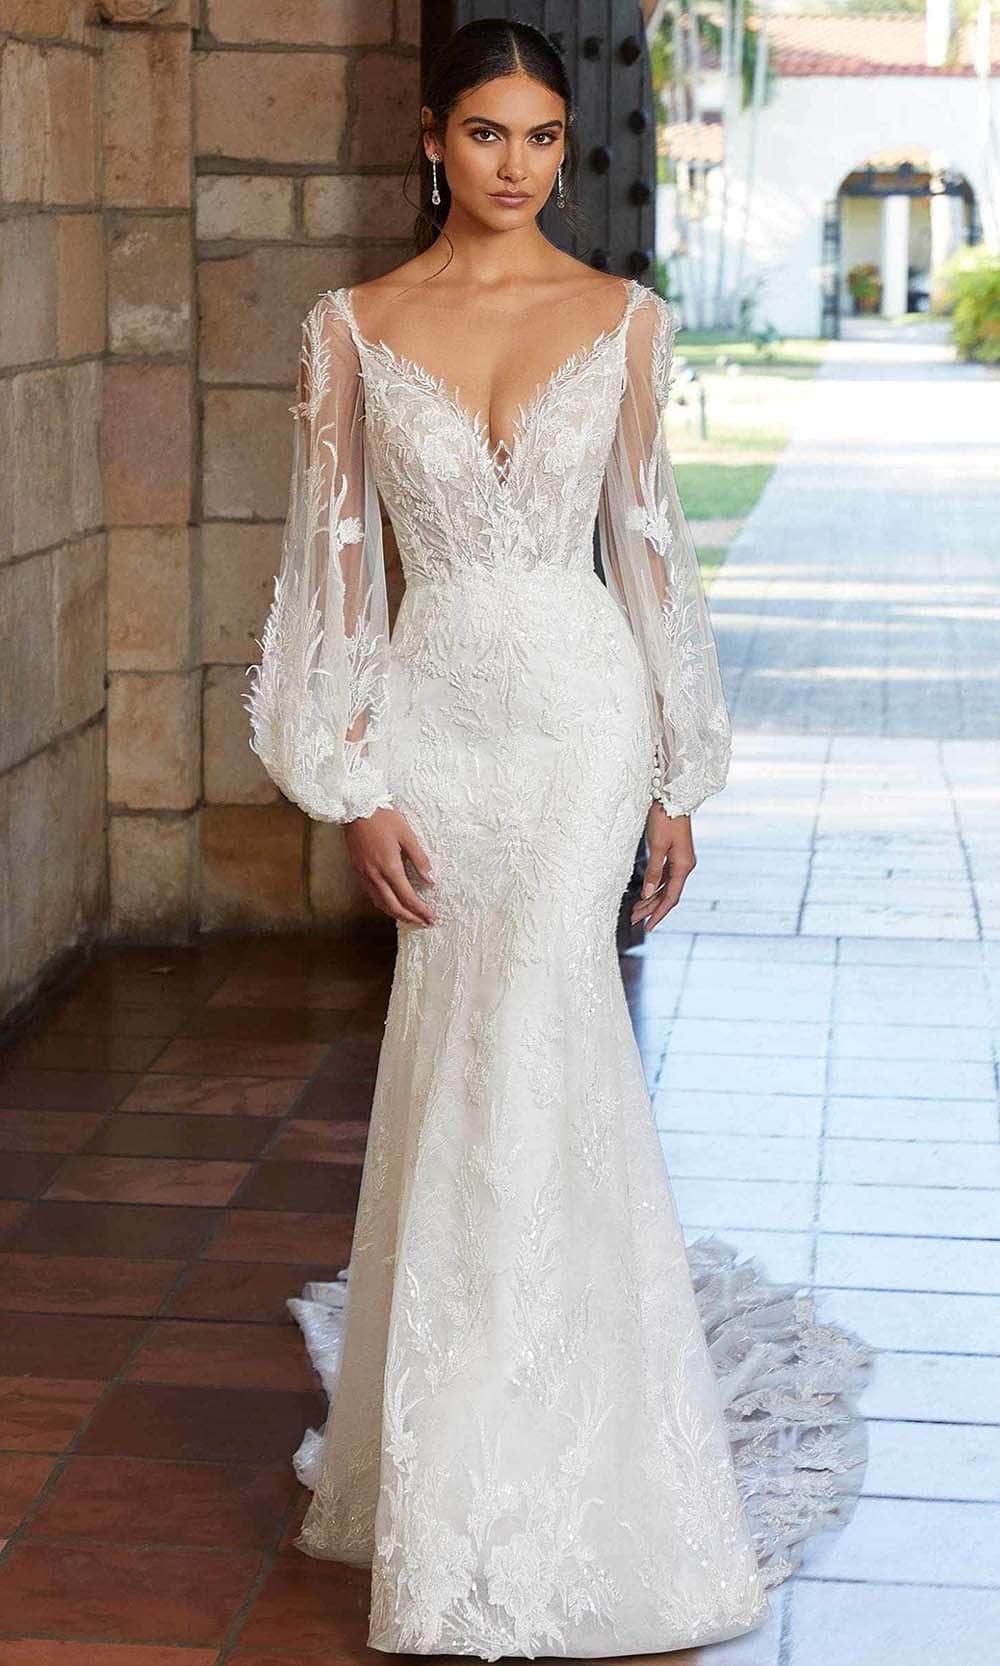 Image of Mori Lee Bridal 1086 - Illusion V-Neck Embroidered Bridal Gown